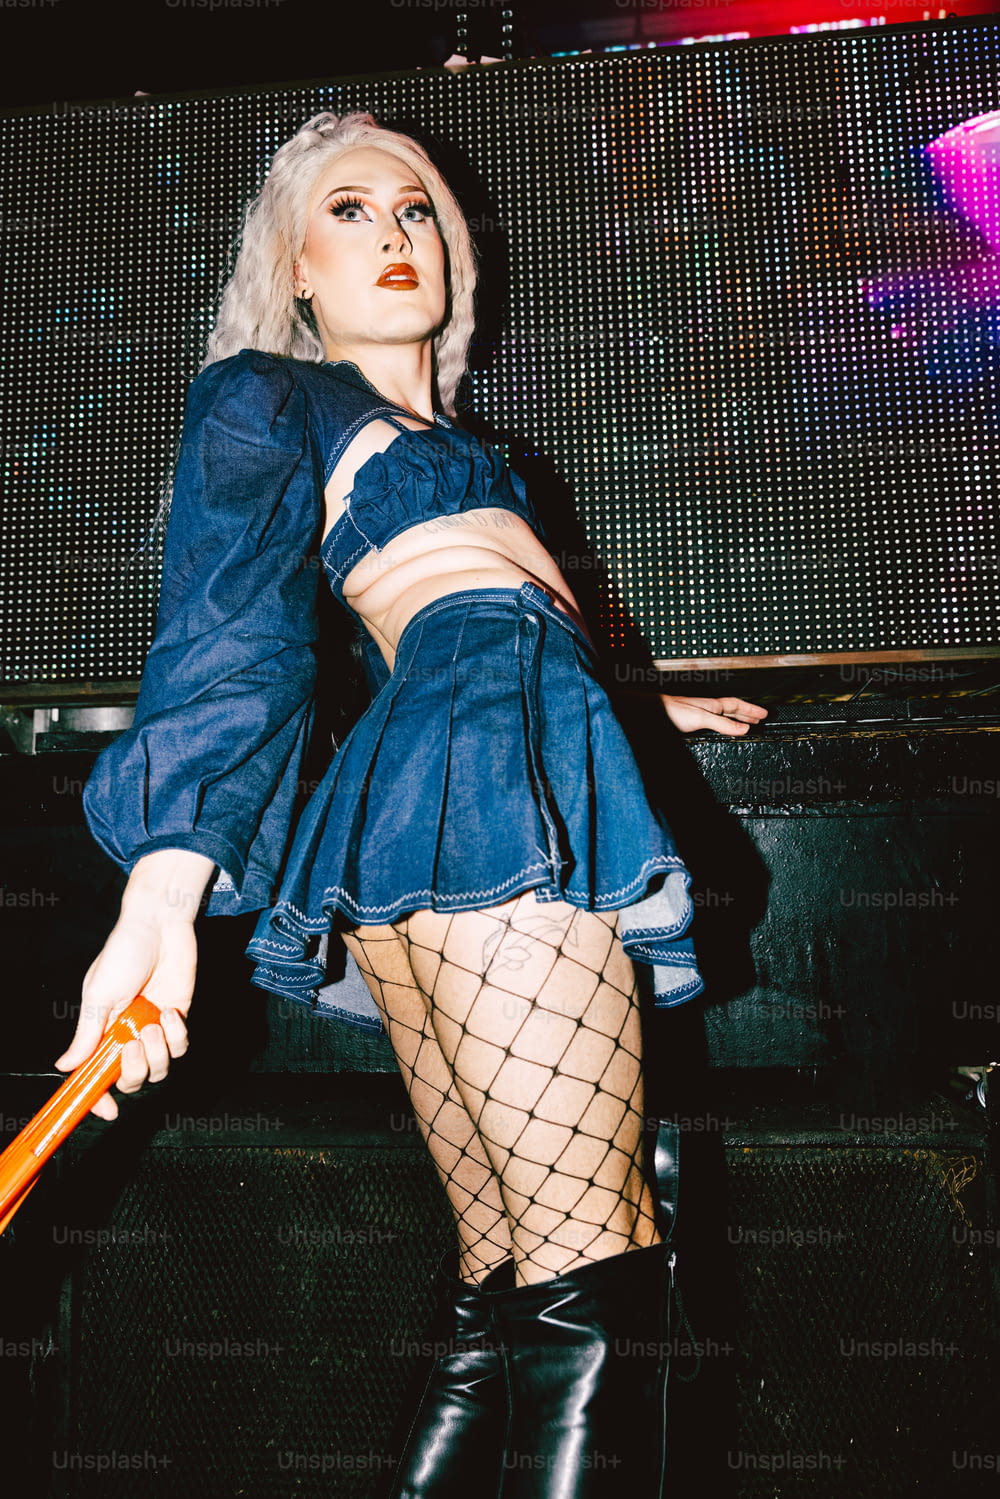 a woman in a blue dress and fishnet stockings